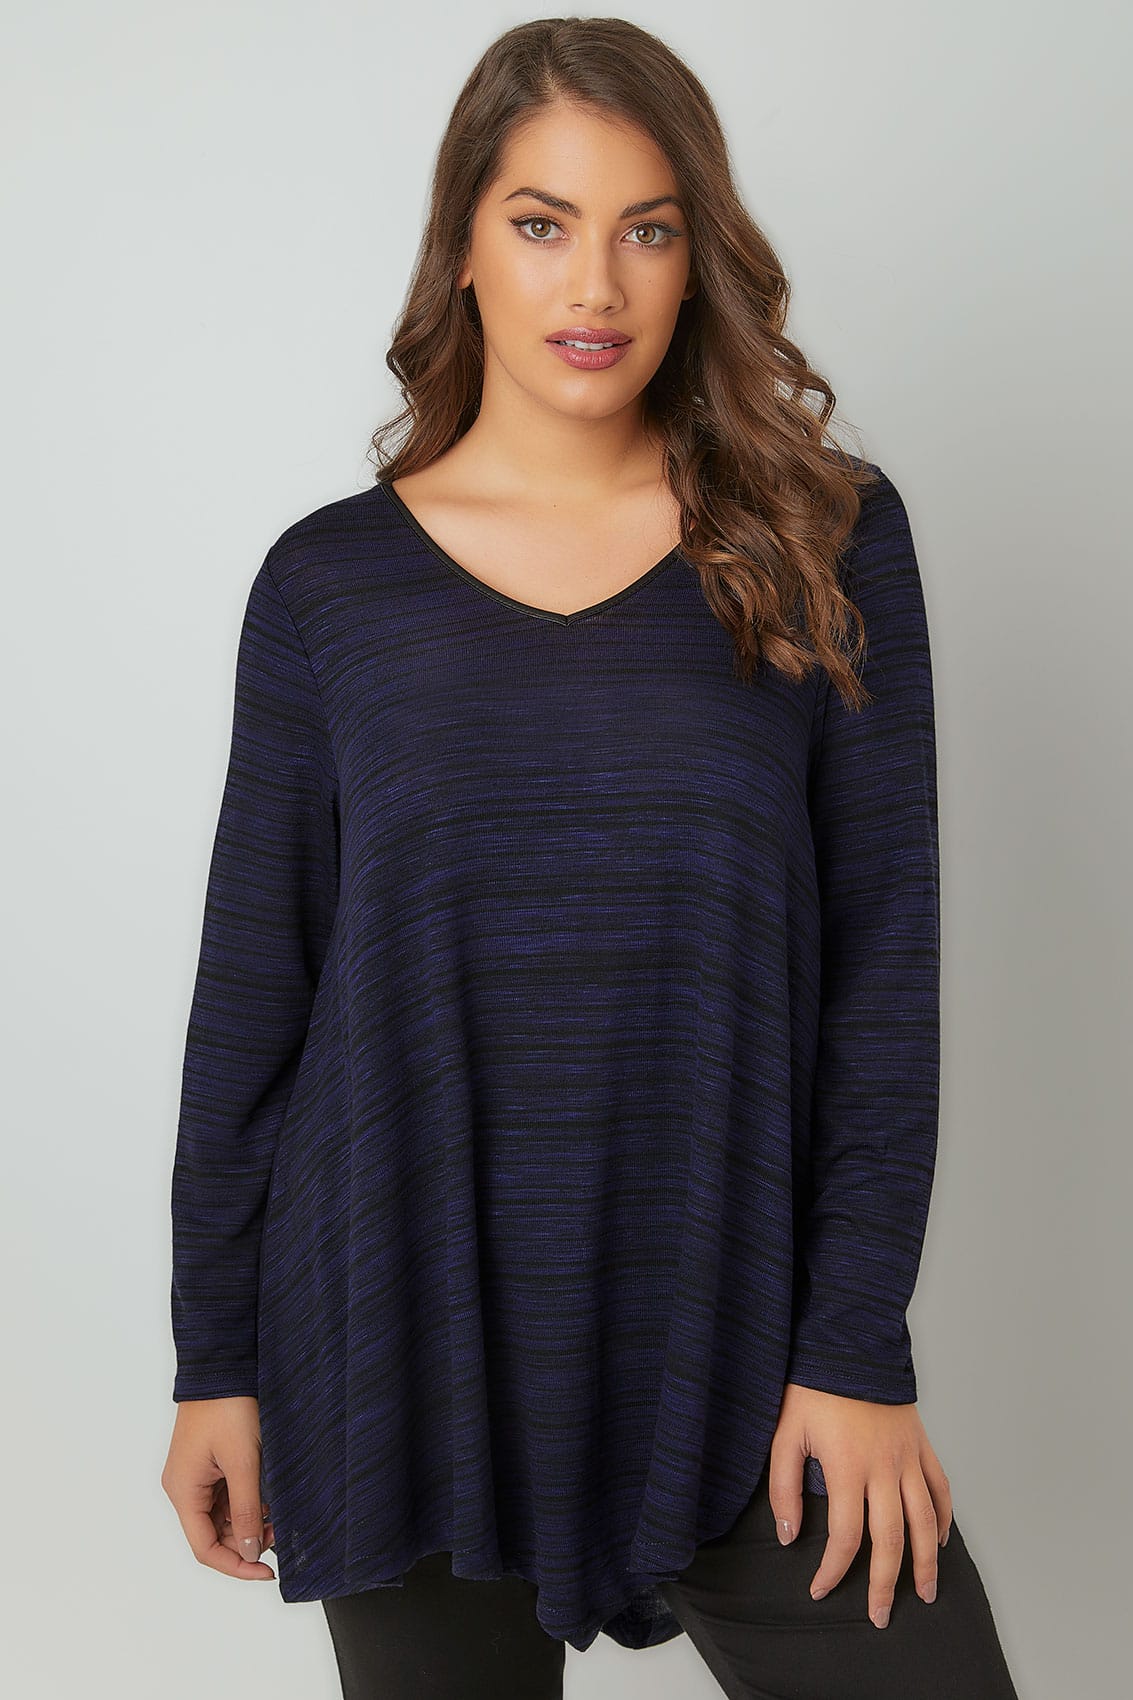 Blue And Black Space Dye Jersey Top With Asymmetric Hem And Pu